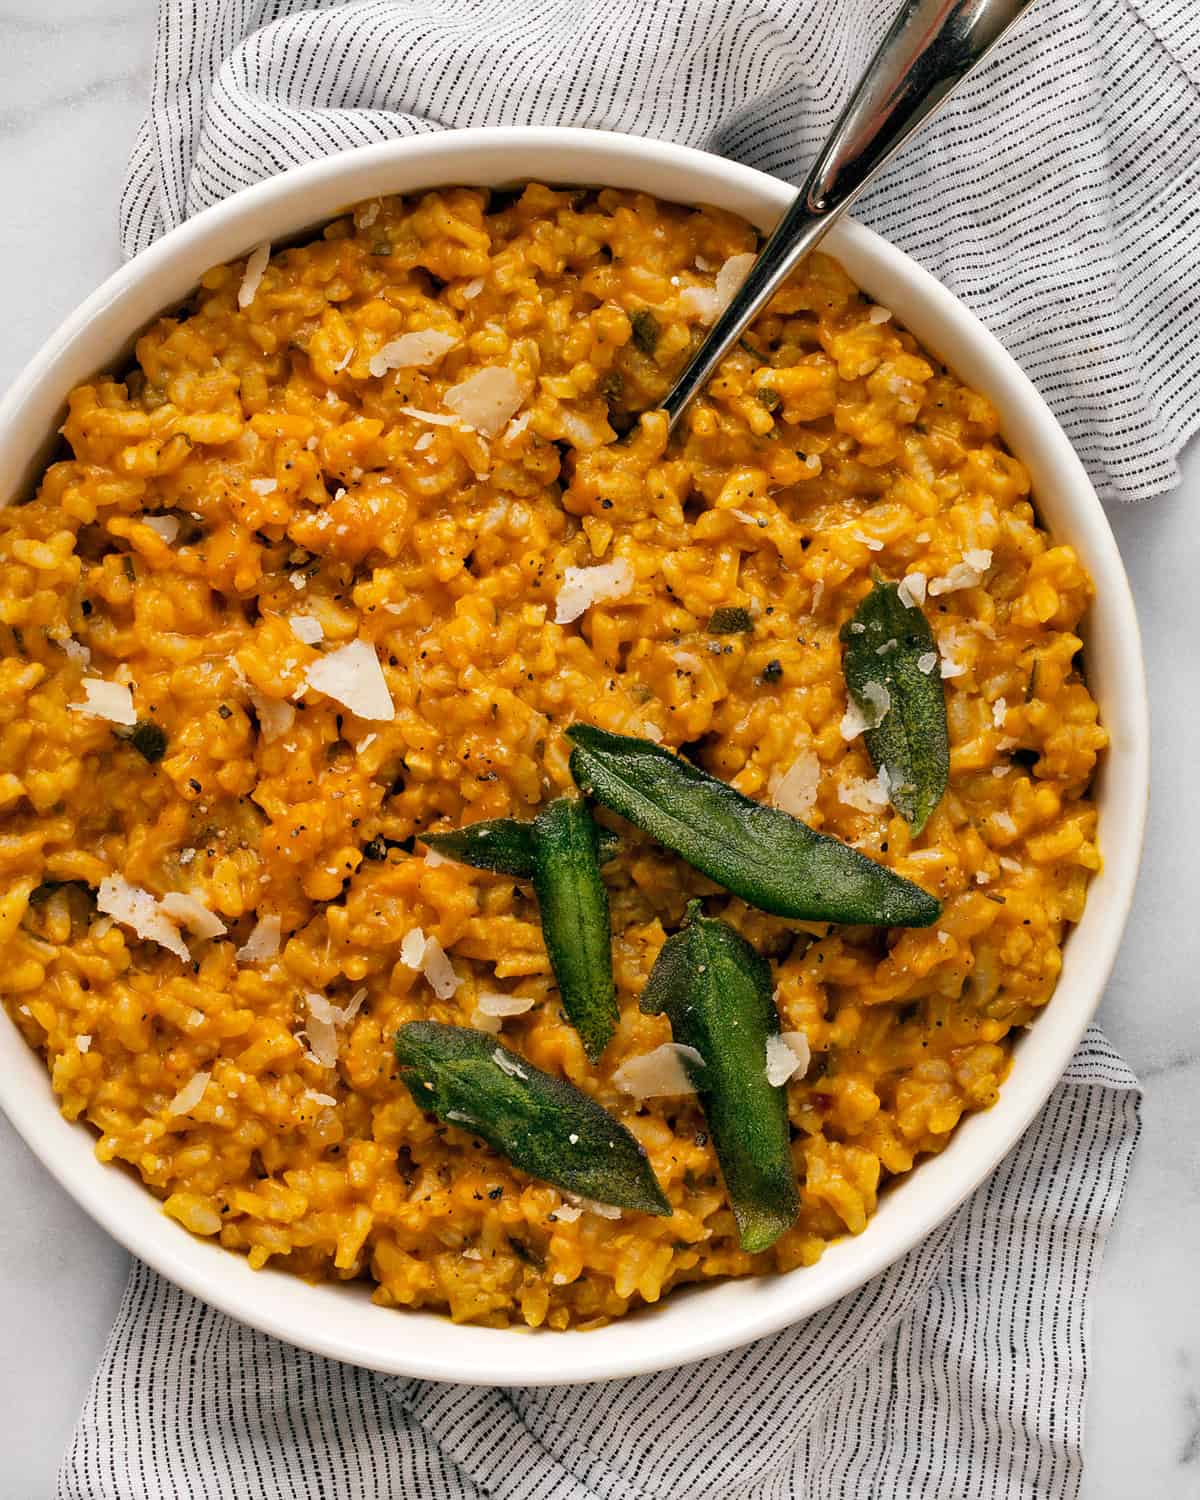 Pumpkin risotto in a bowl with a serving spoon.